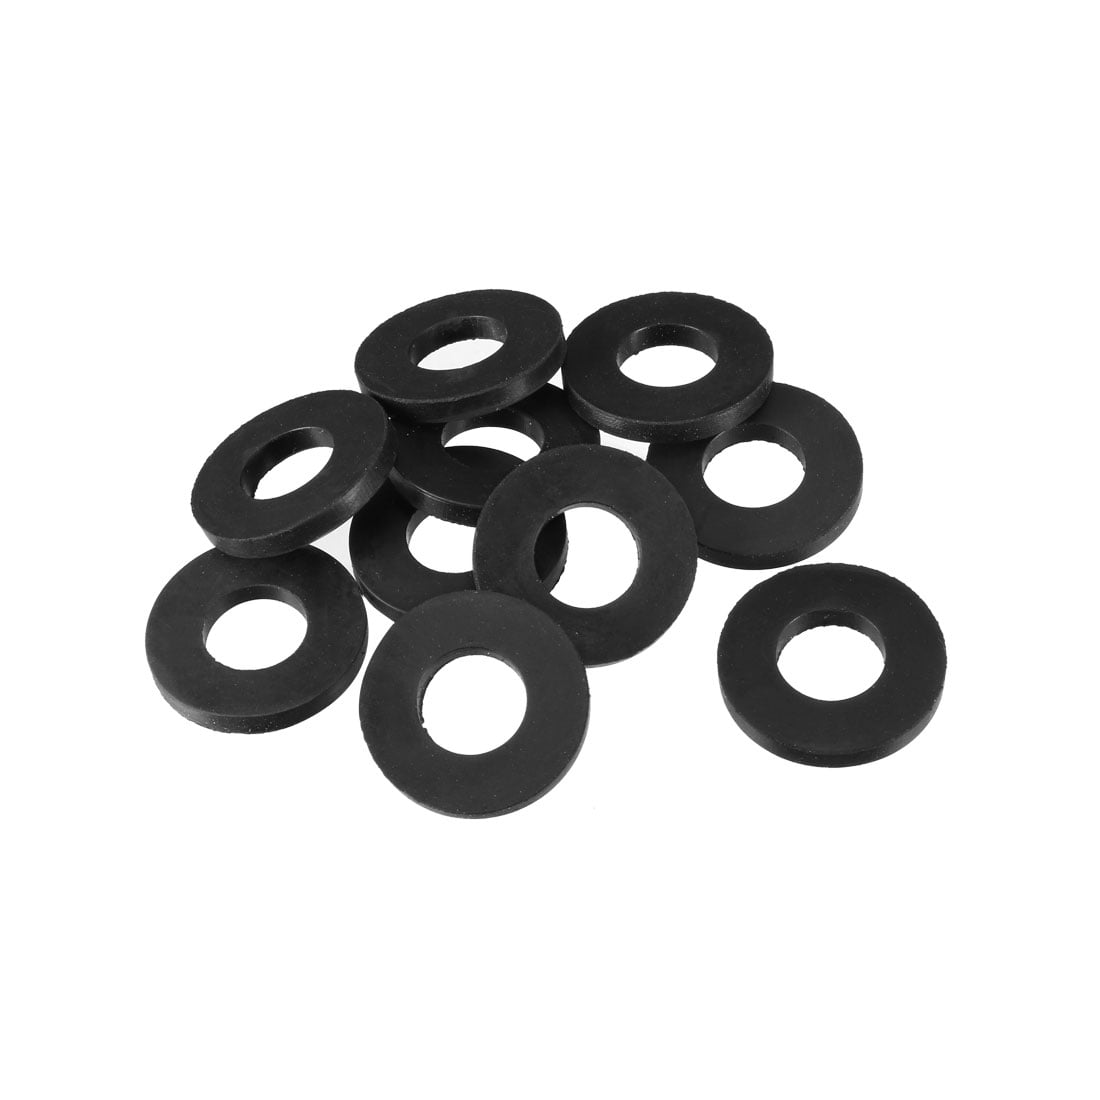 M4 M5 M6 O-Ring Hose Gasket Flat Rubber Washer Lot For Faucet Grommet 10 Pcs USA 